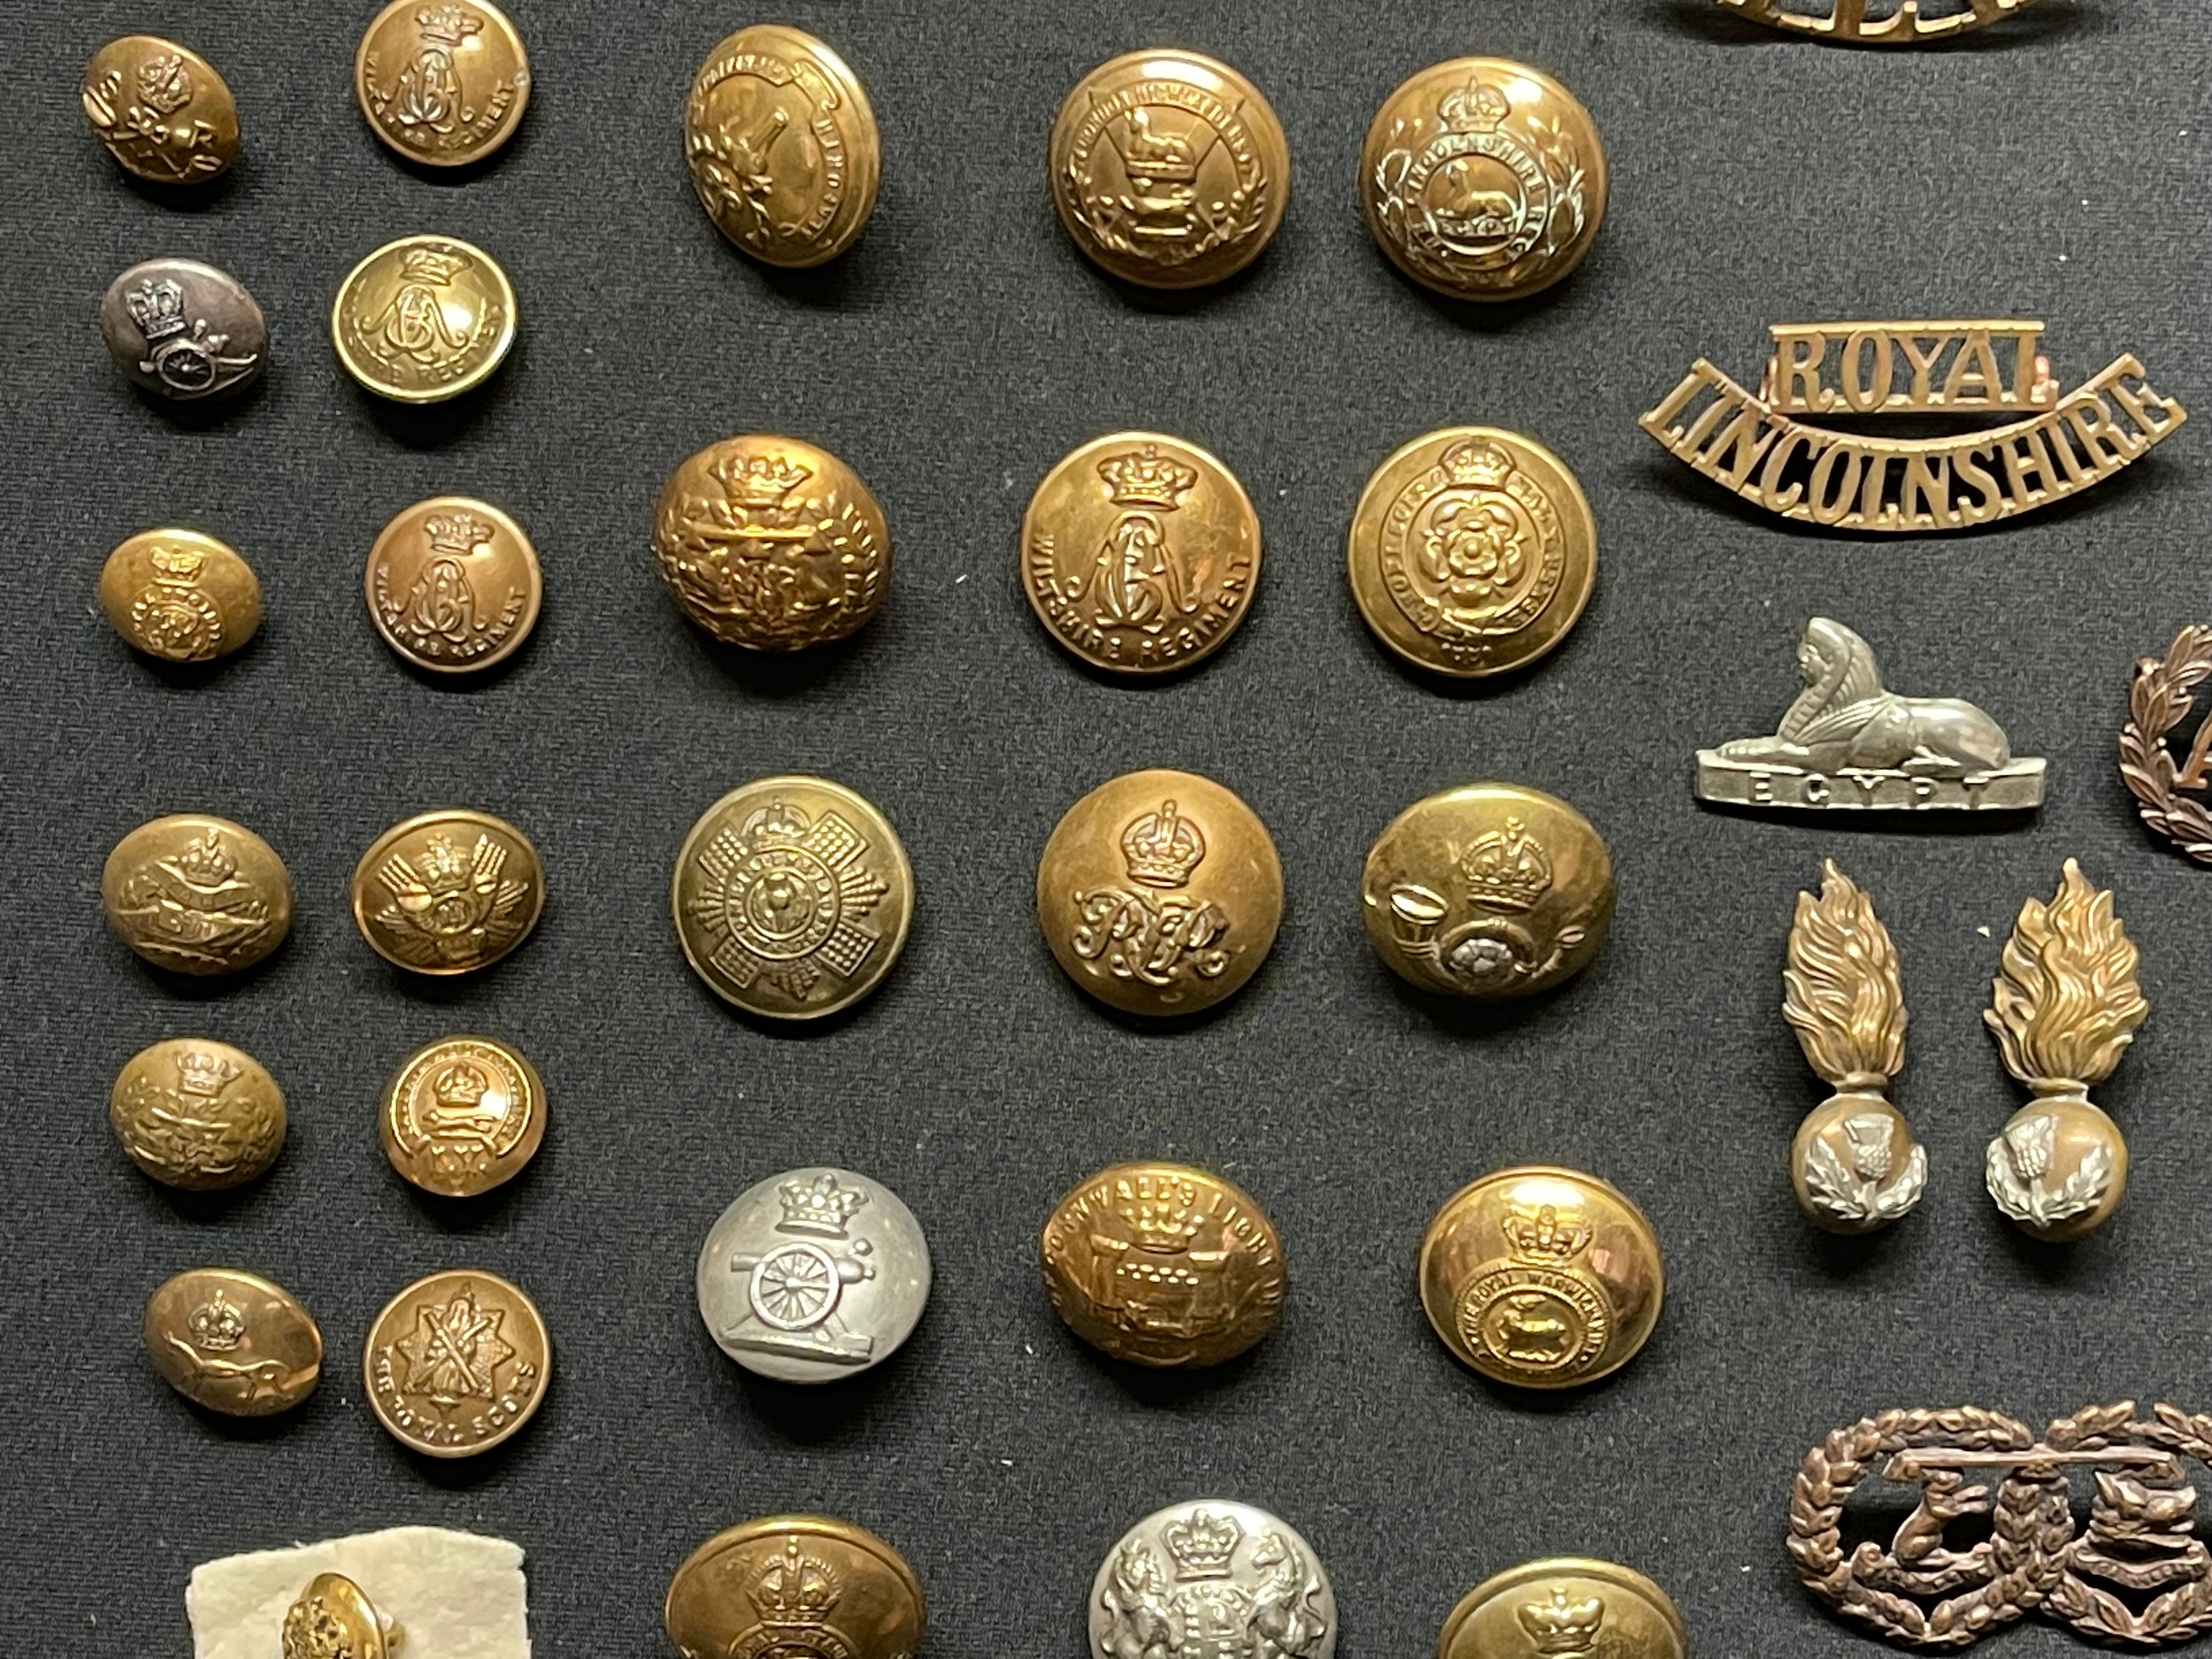 WW2 British Metal Shoulder titles, Collar Dogs and Buttons plus some WW1 examples to include - Image 8 of 17